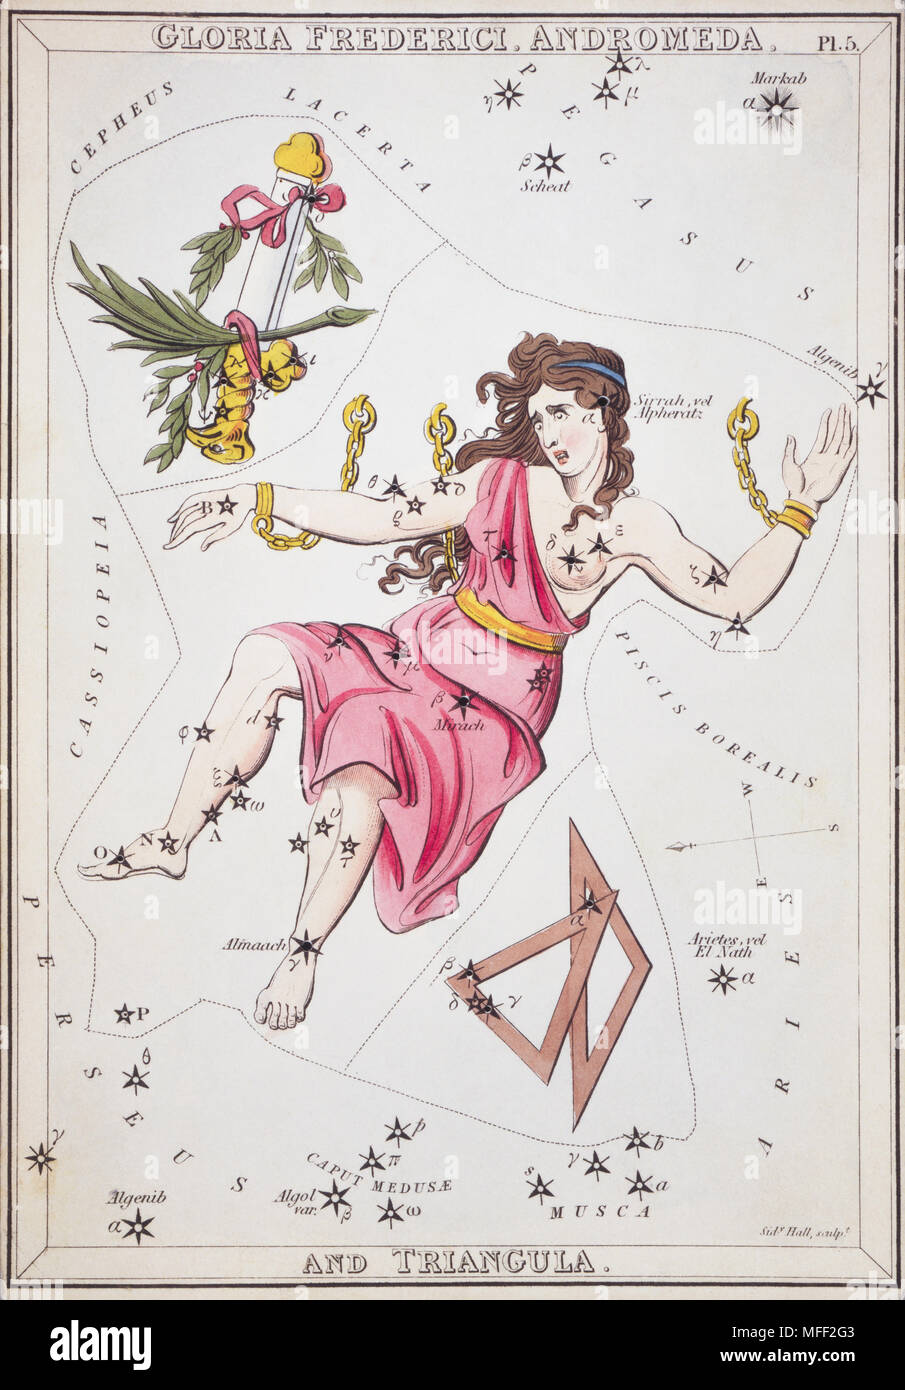 Gloria Frederici, Andromeda and Triangula. Card Number 5 from Urania's Mirror, or A View of the Heavens, one of a set of 32 astronomical star chart cards engraved by Sidney Hall and publshed 1824. Stock Photo